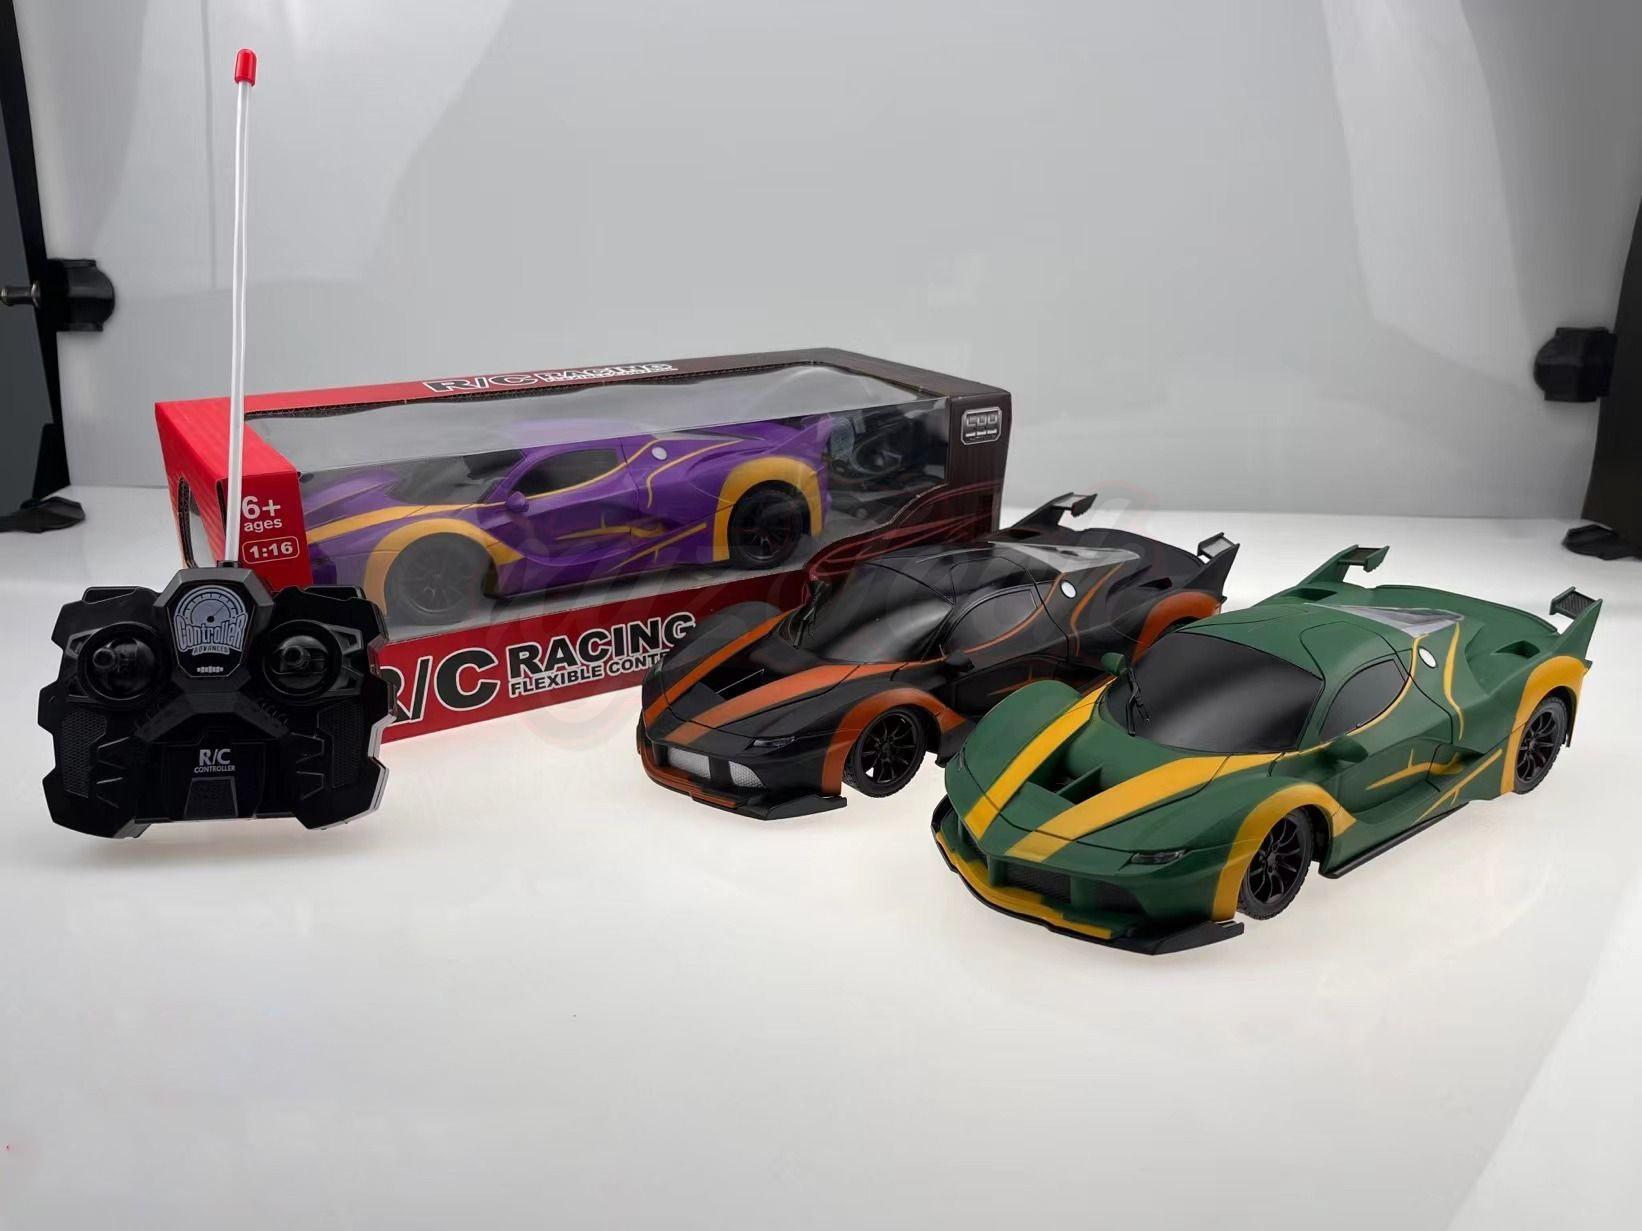 1:16 Four-way remote control car with lights (black, green and purple 3 color mix)